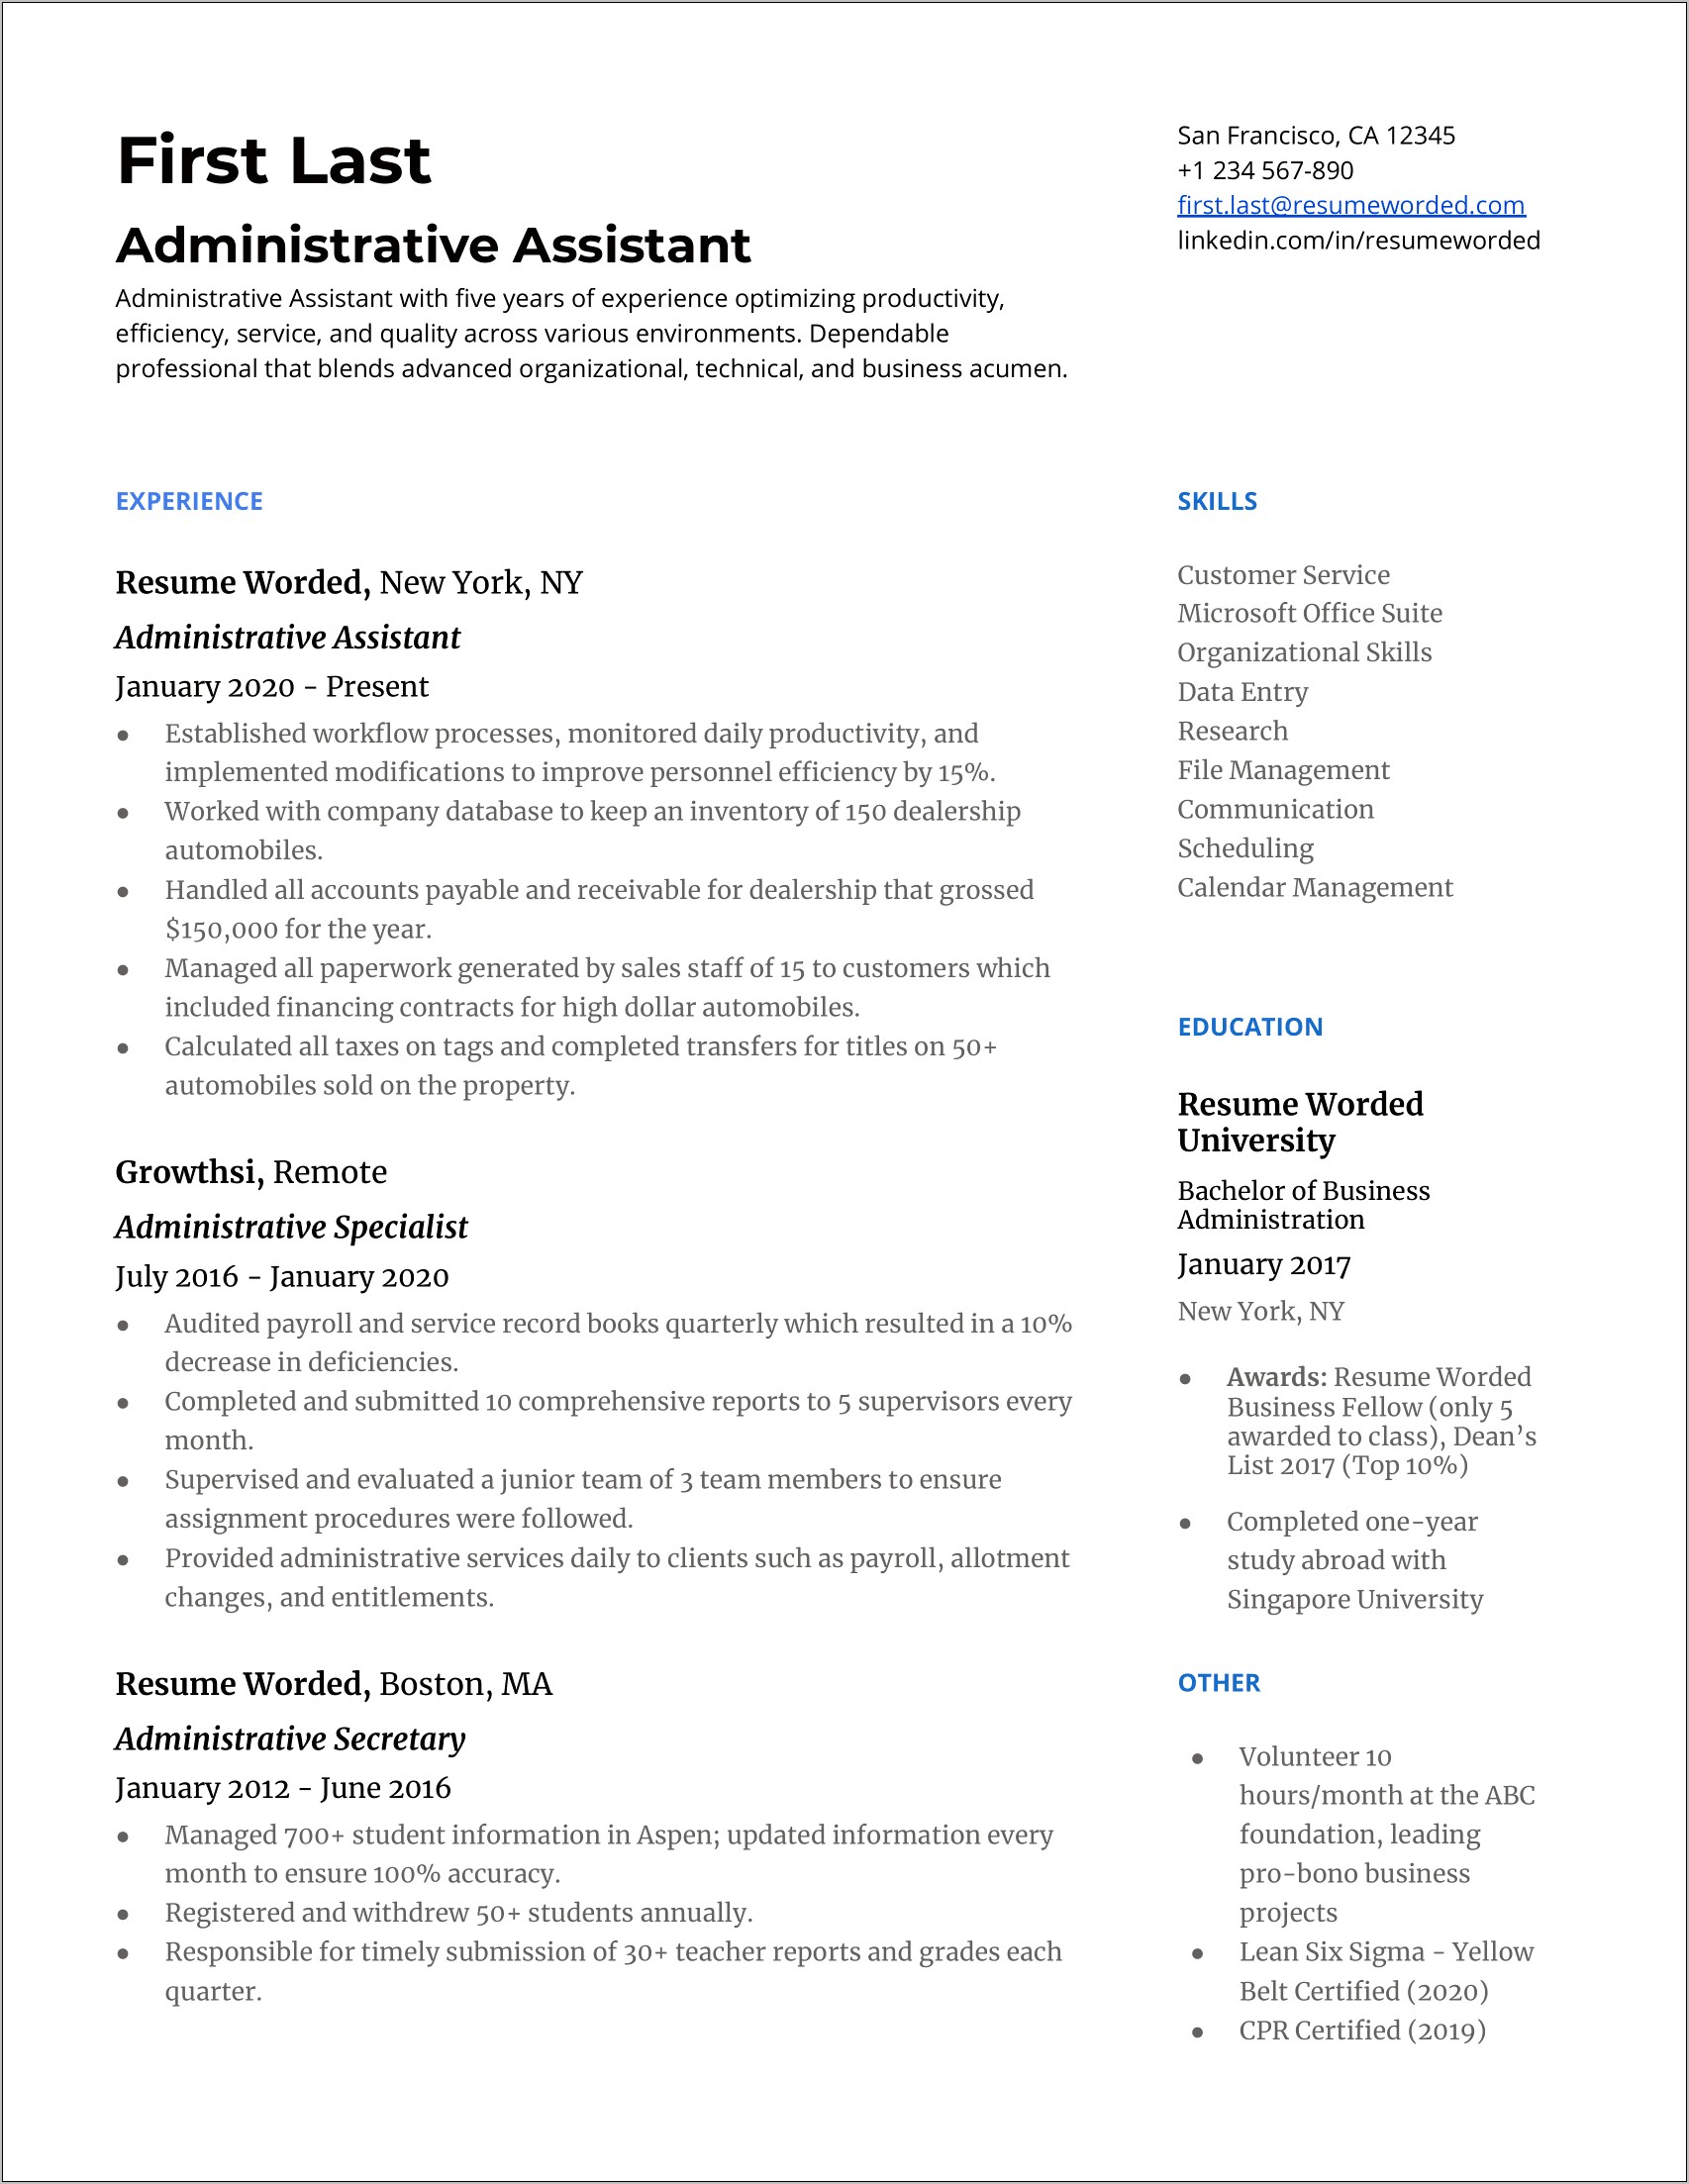 Key Skills Of Administrative Assistant In Resume